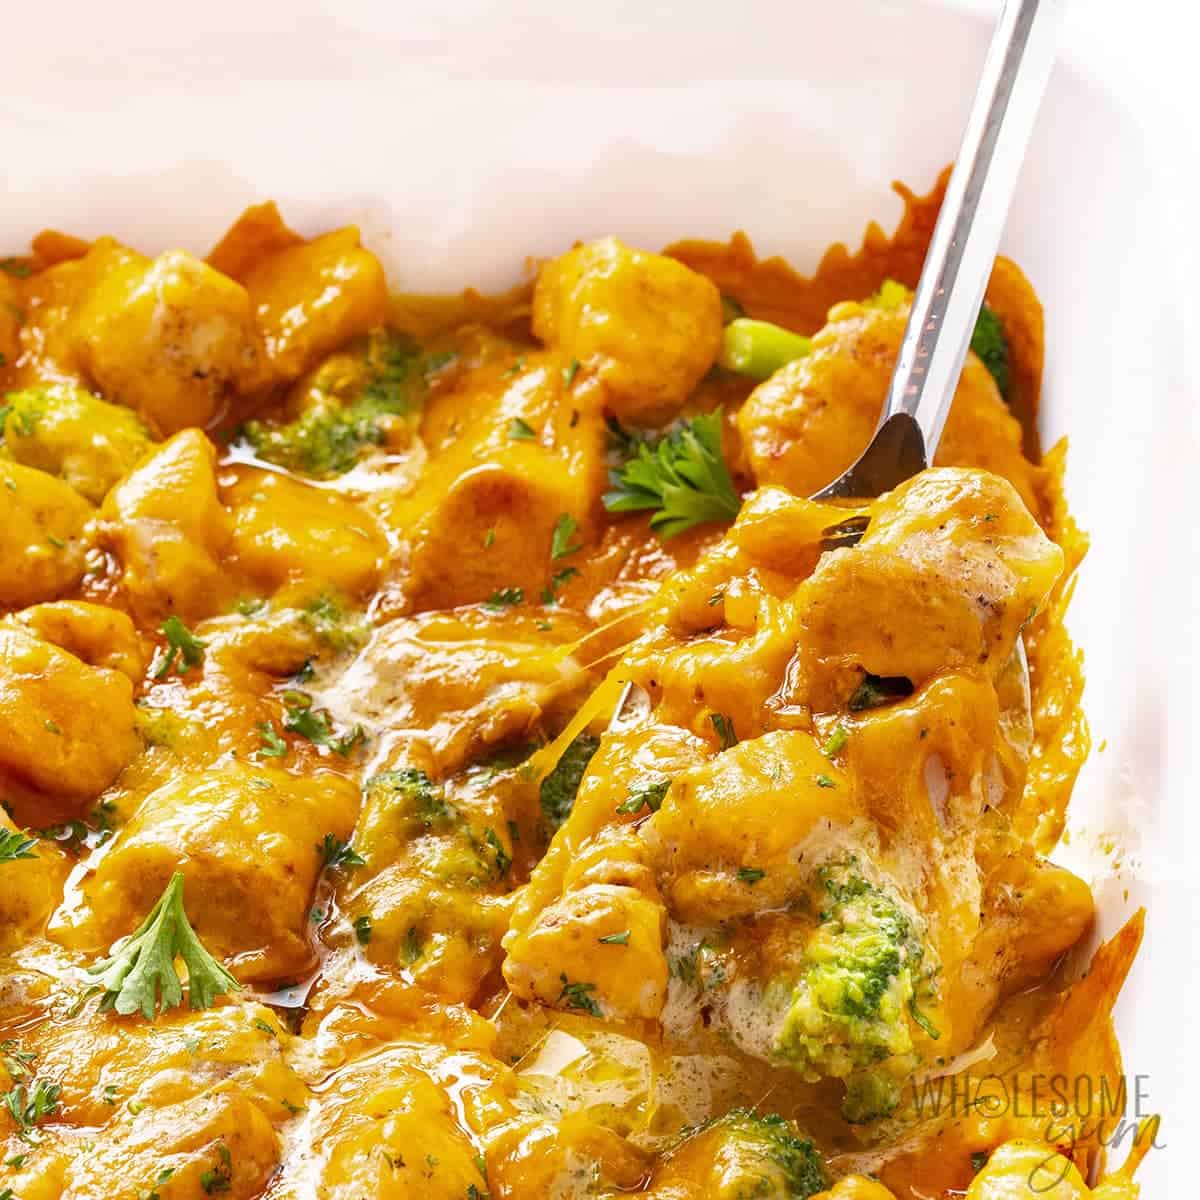 Chicken and broccoli casserole with spoon